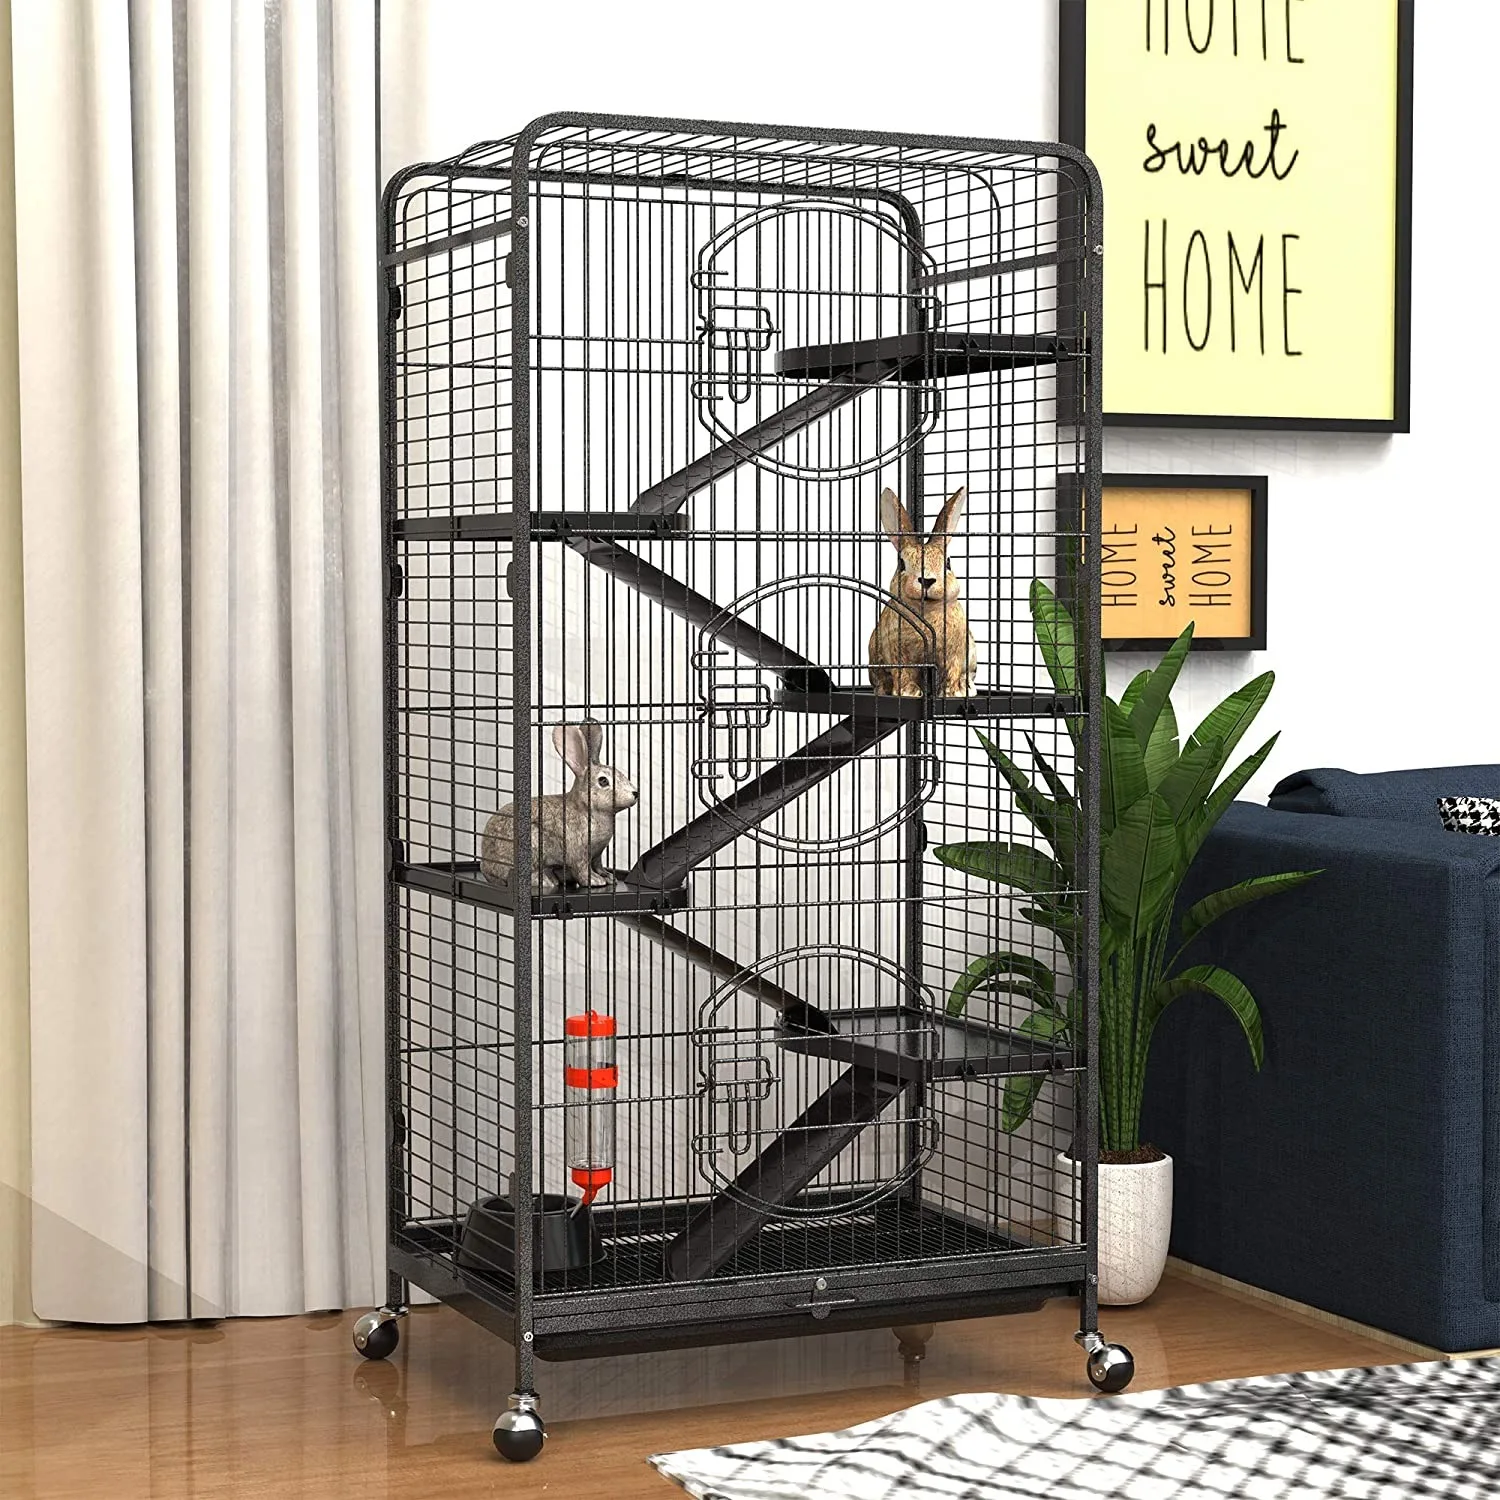 

High quality stainless cage pet animals large cage for rabbit hamster pet rat breeding cage, Black or customized